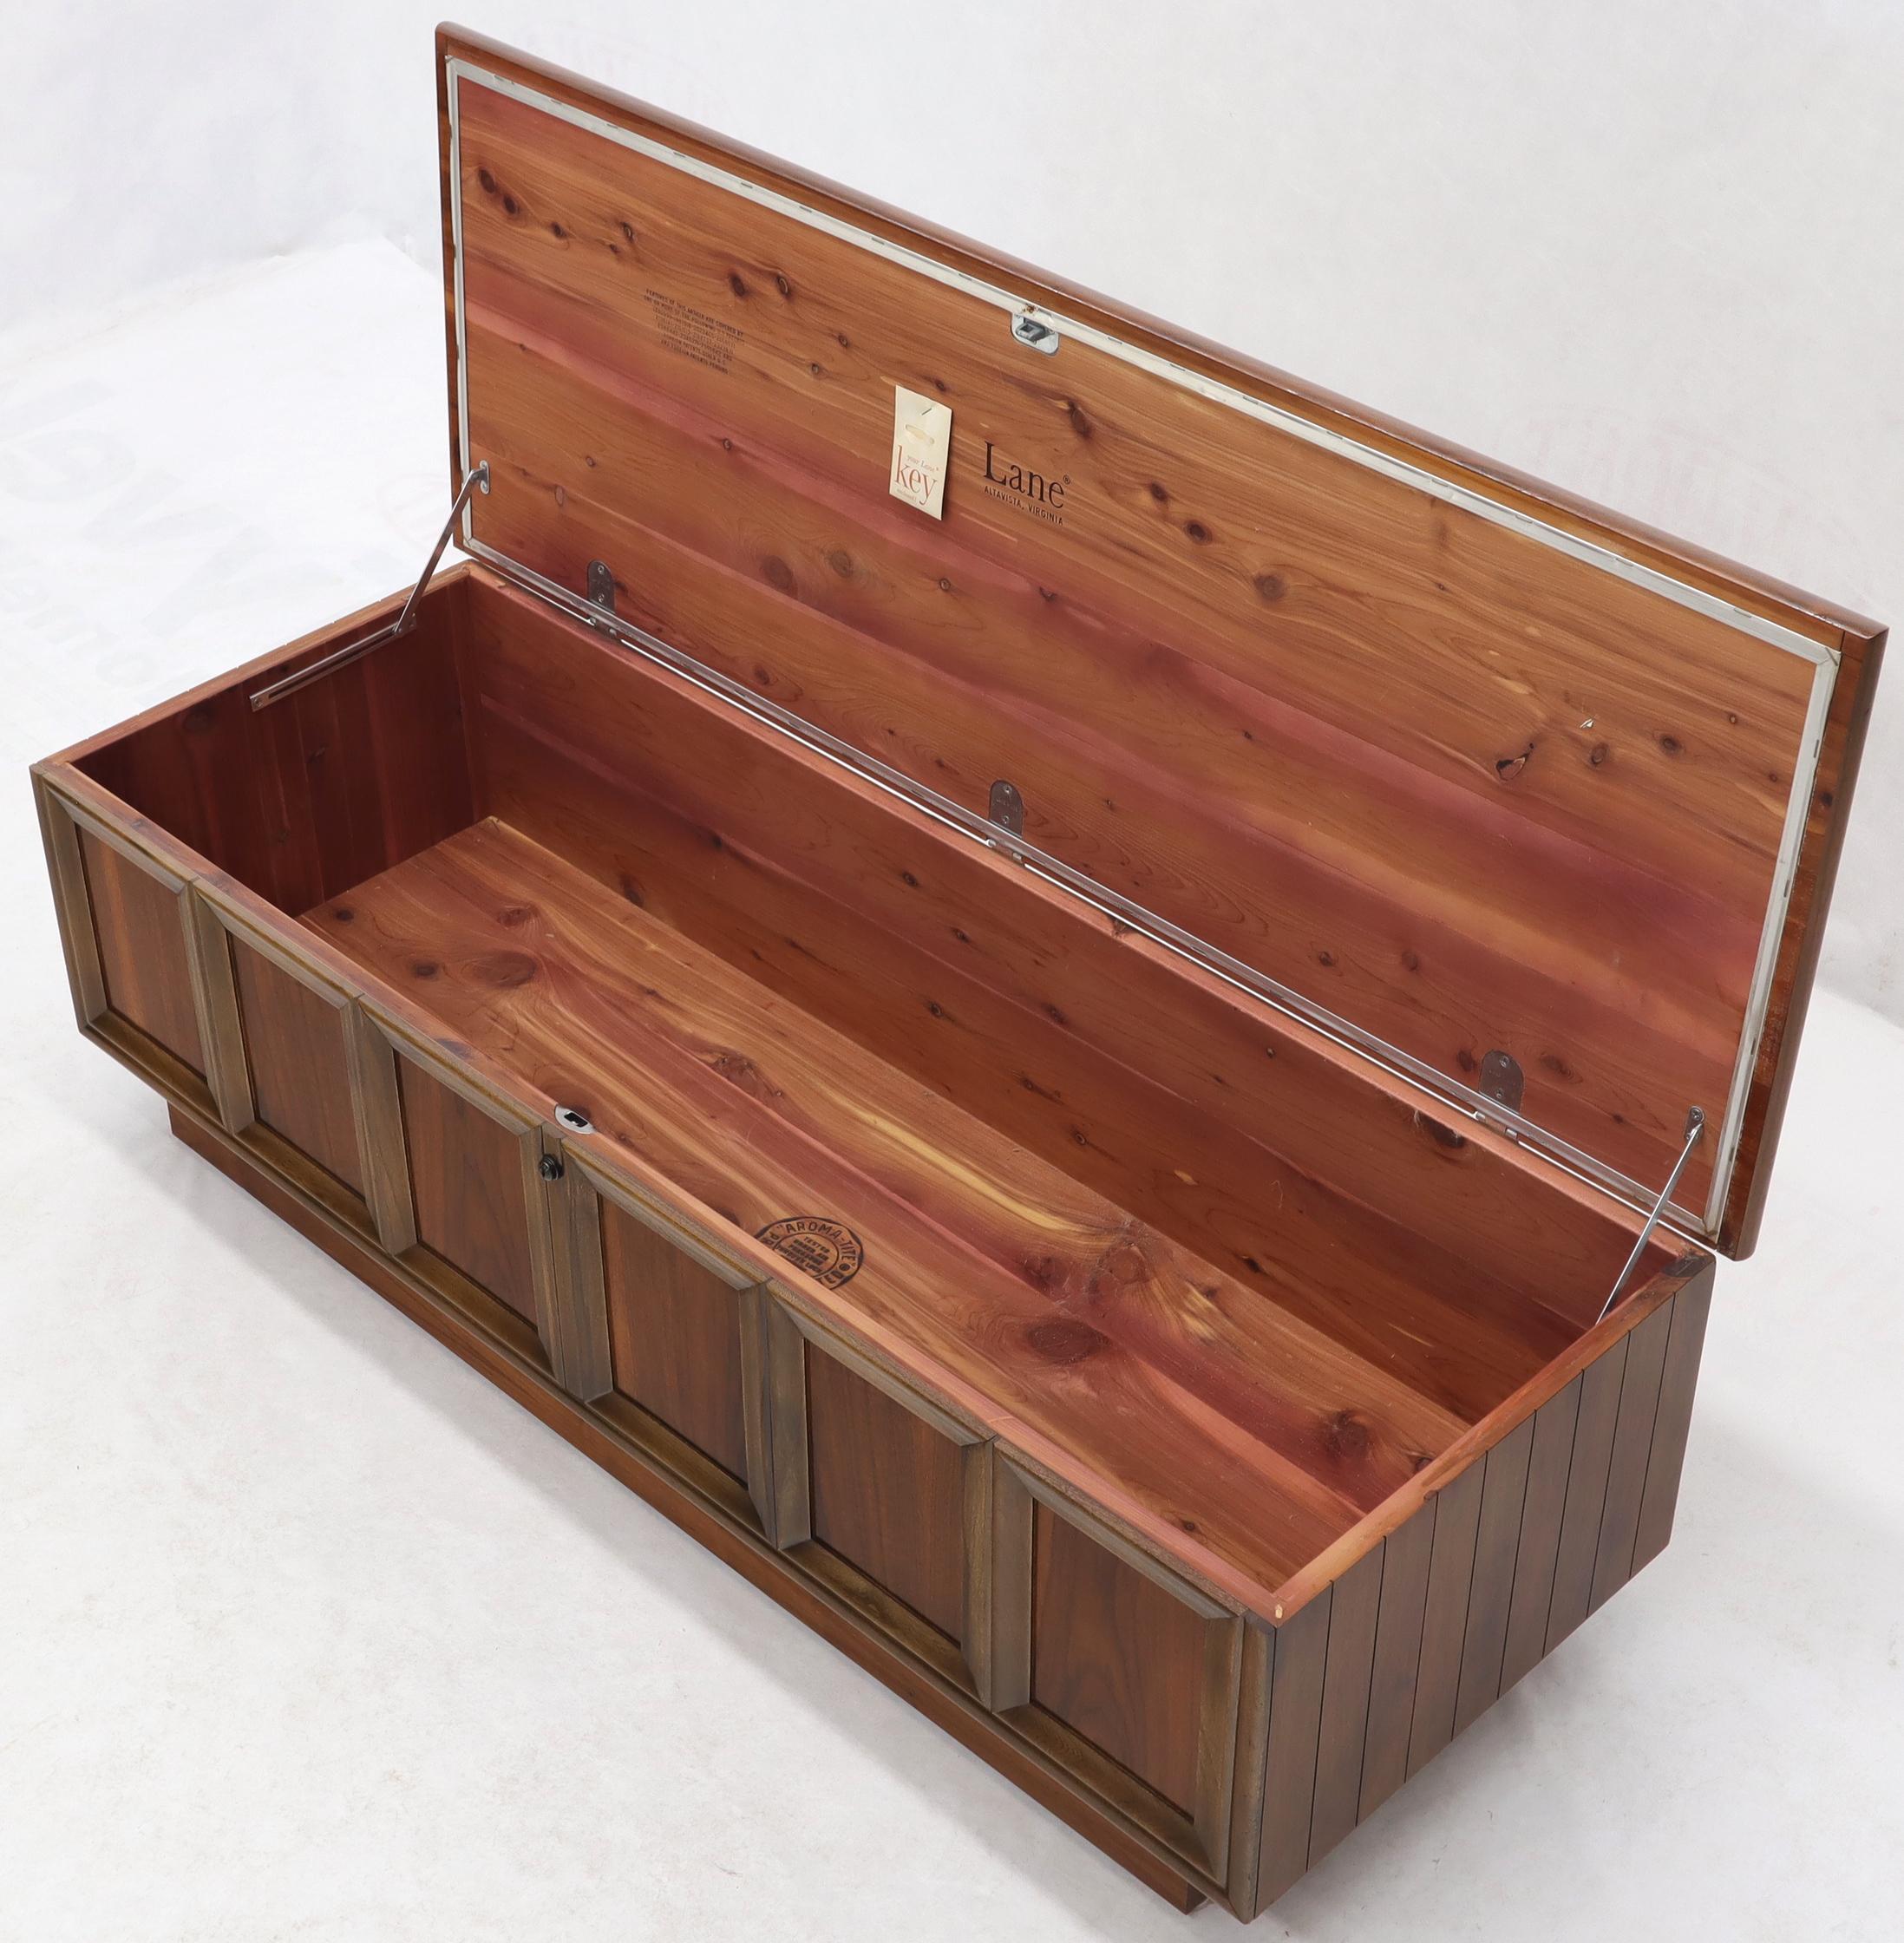 20th Century Walnut Cedar Lined Mid-Century Modern Hope Chest by Lane For Sale